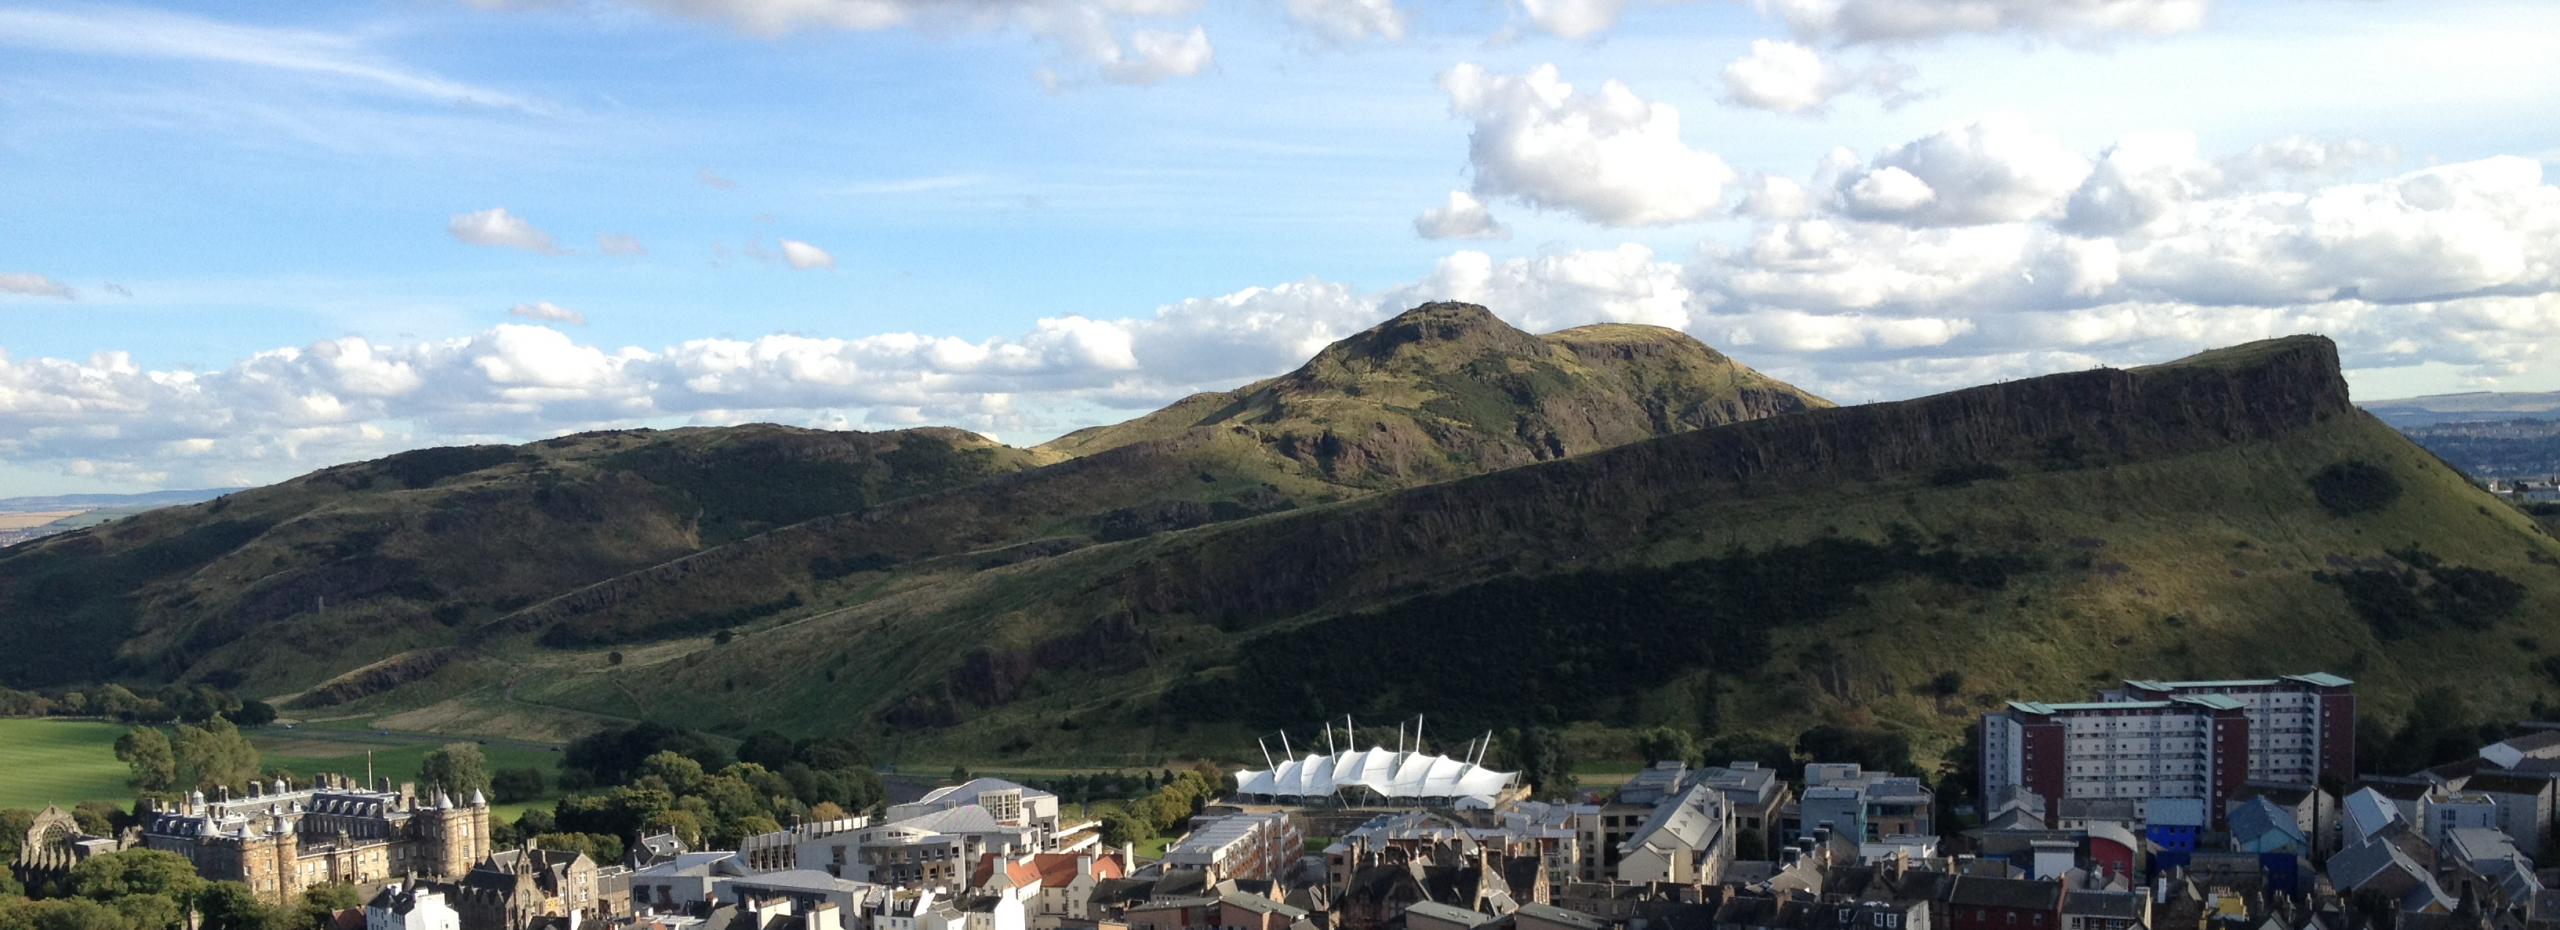 Arthur's Seat and the Salisbury Crags